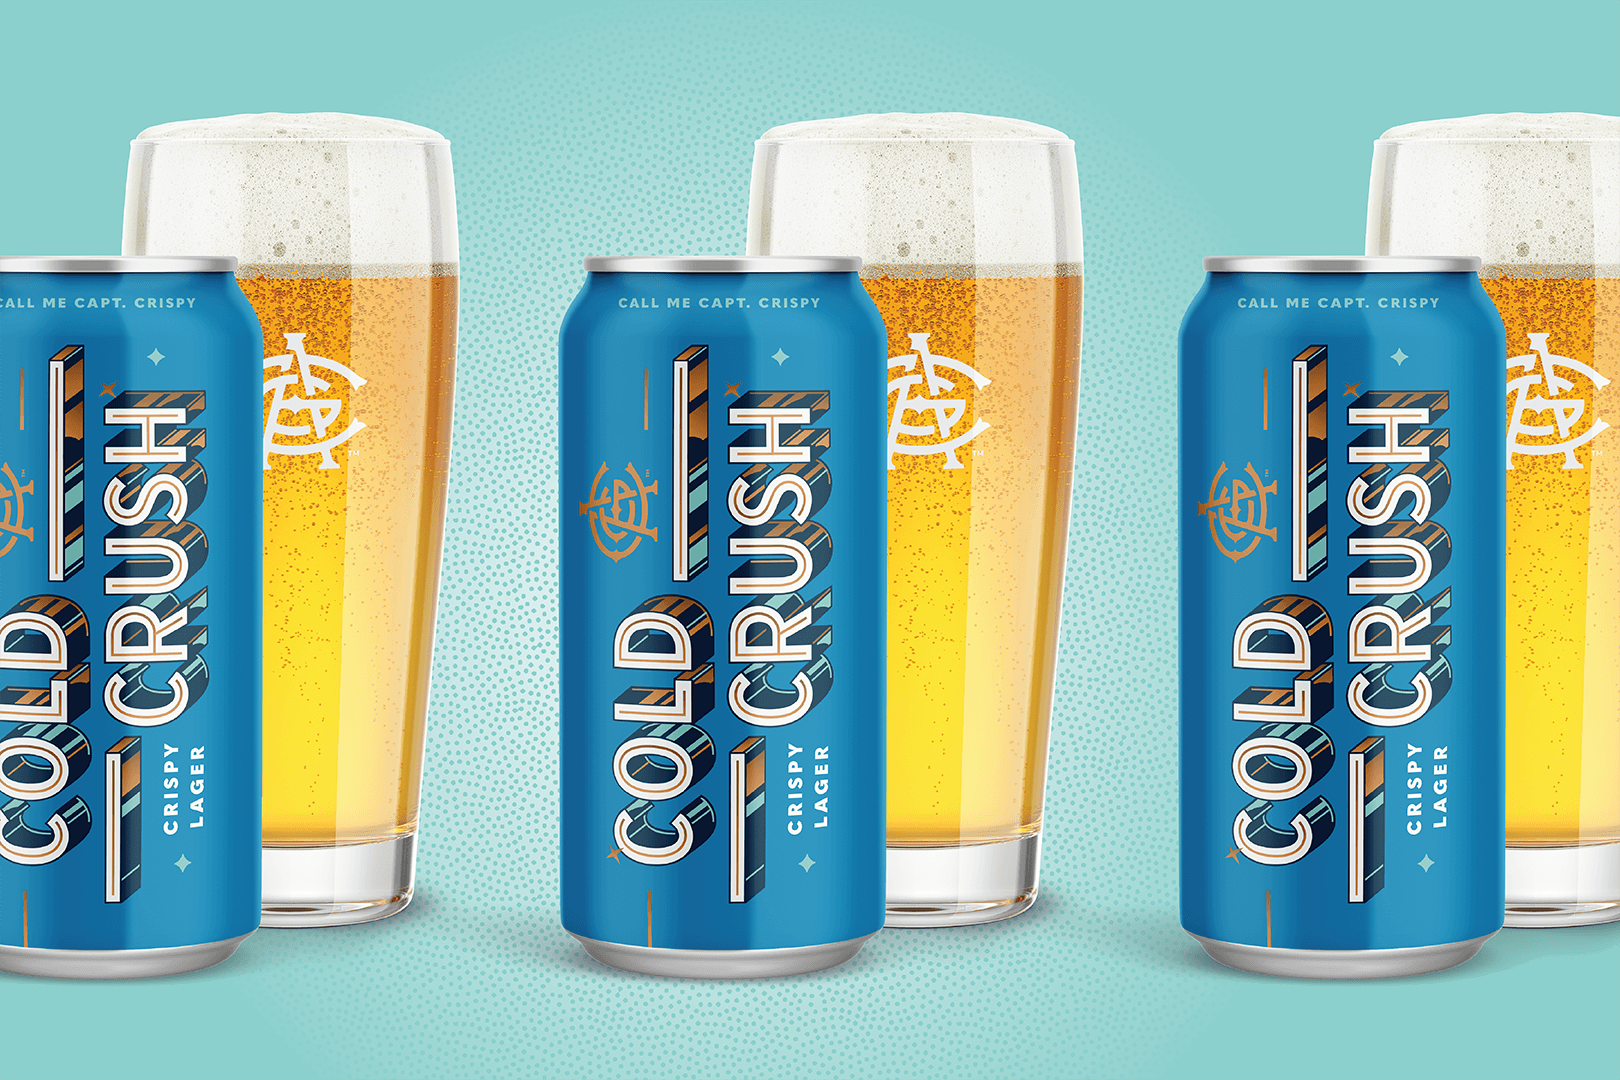 Cold Crush Cans and glasses